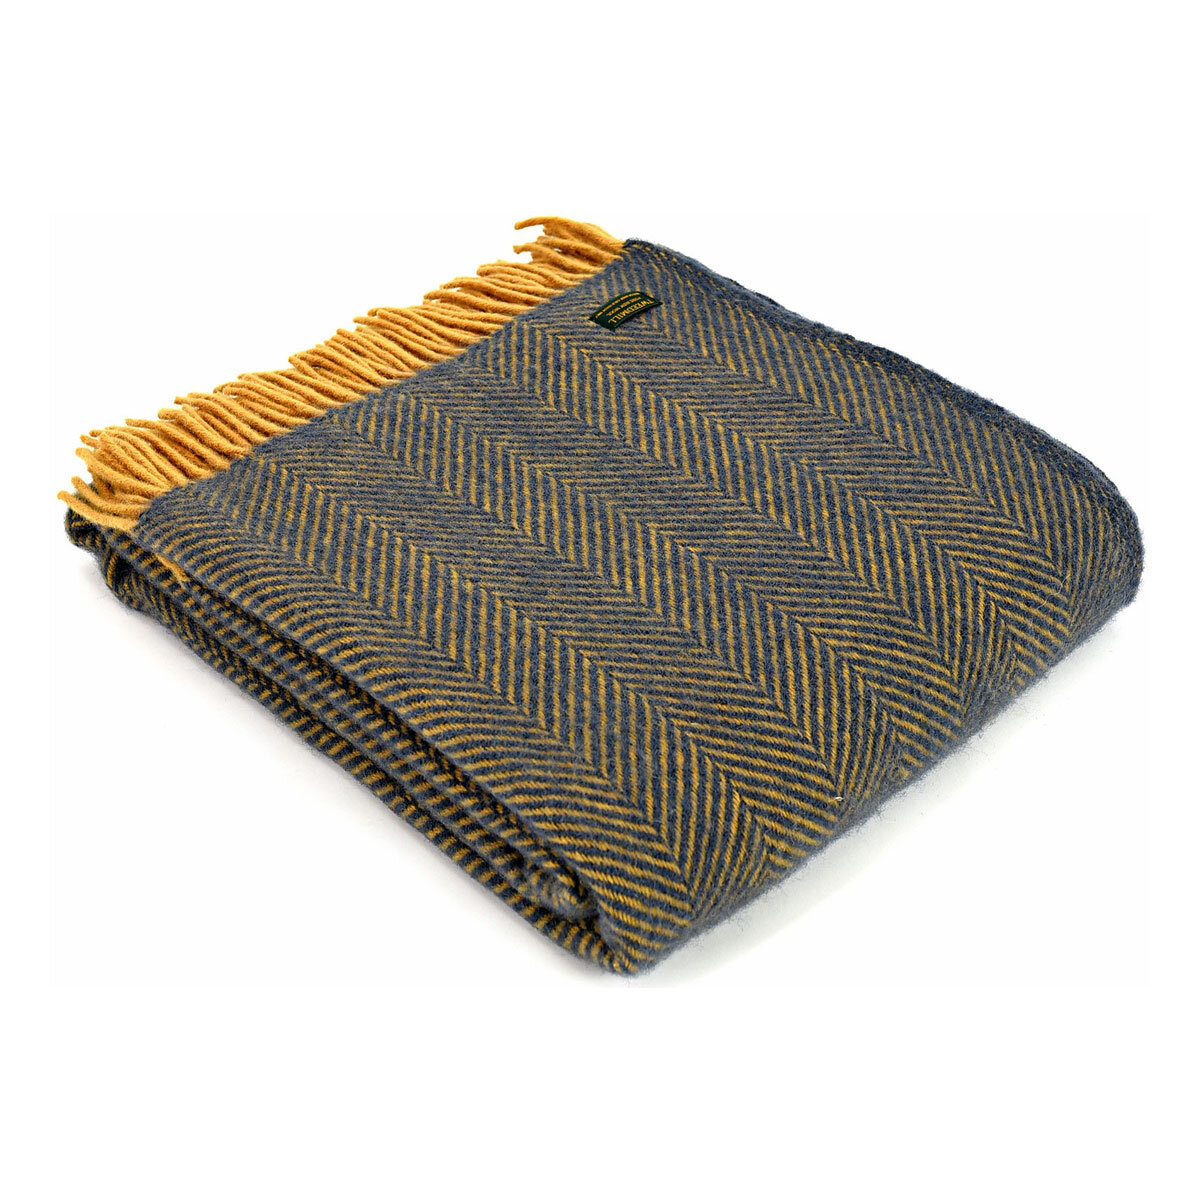 Hector and Queen - Navy and Mustard Welsh Throw